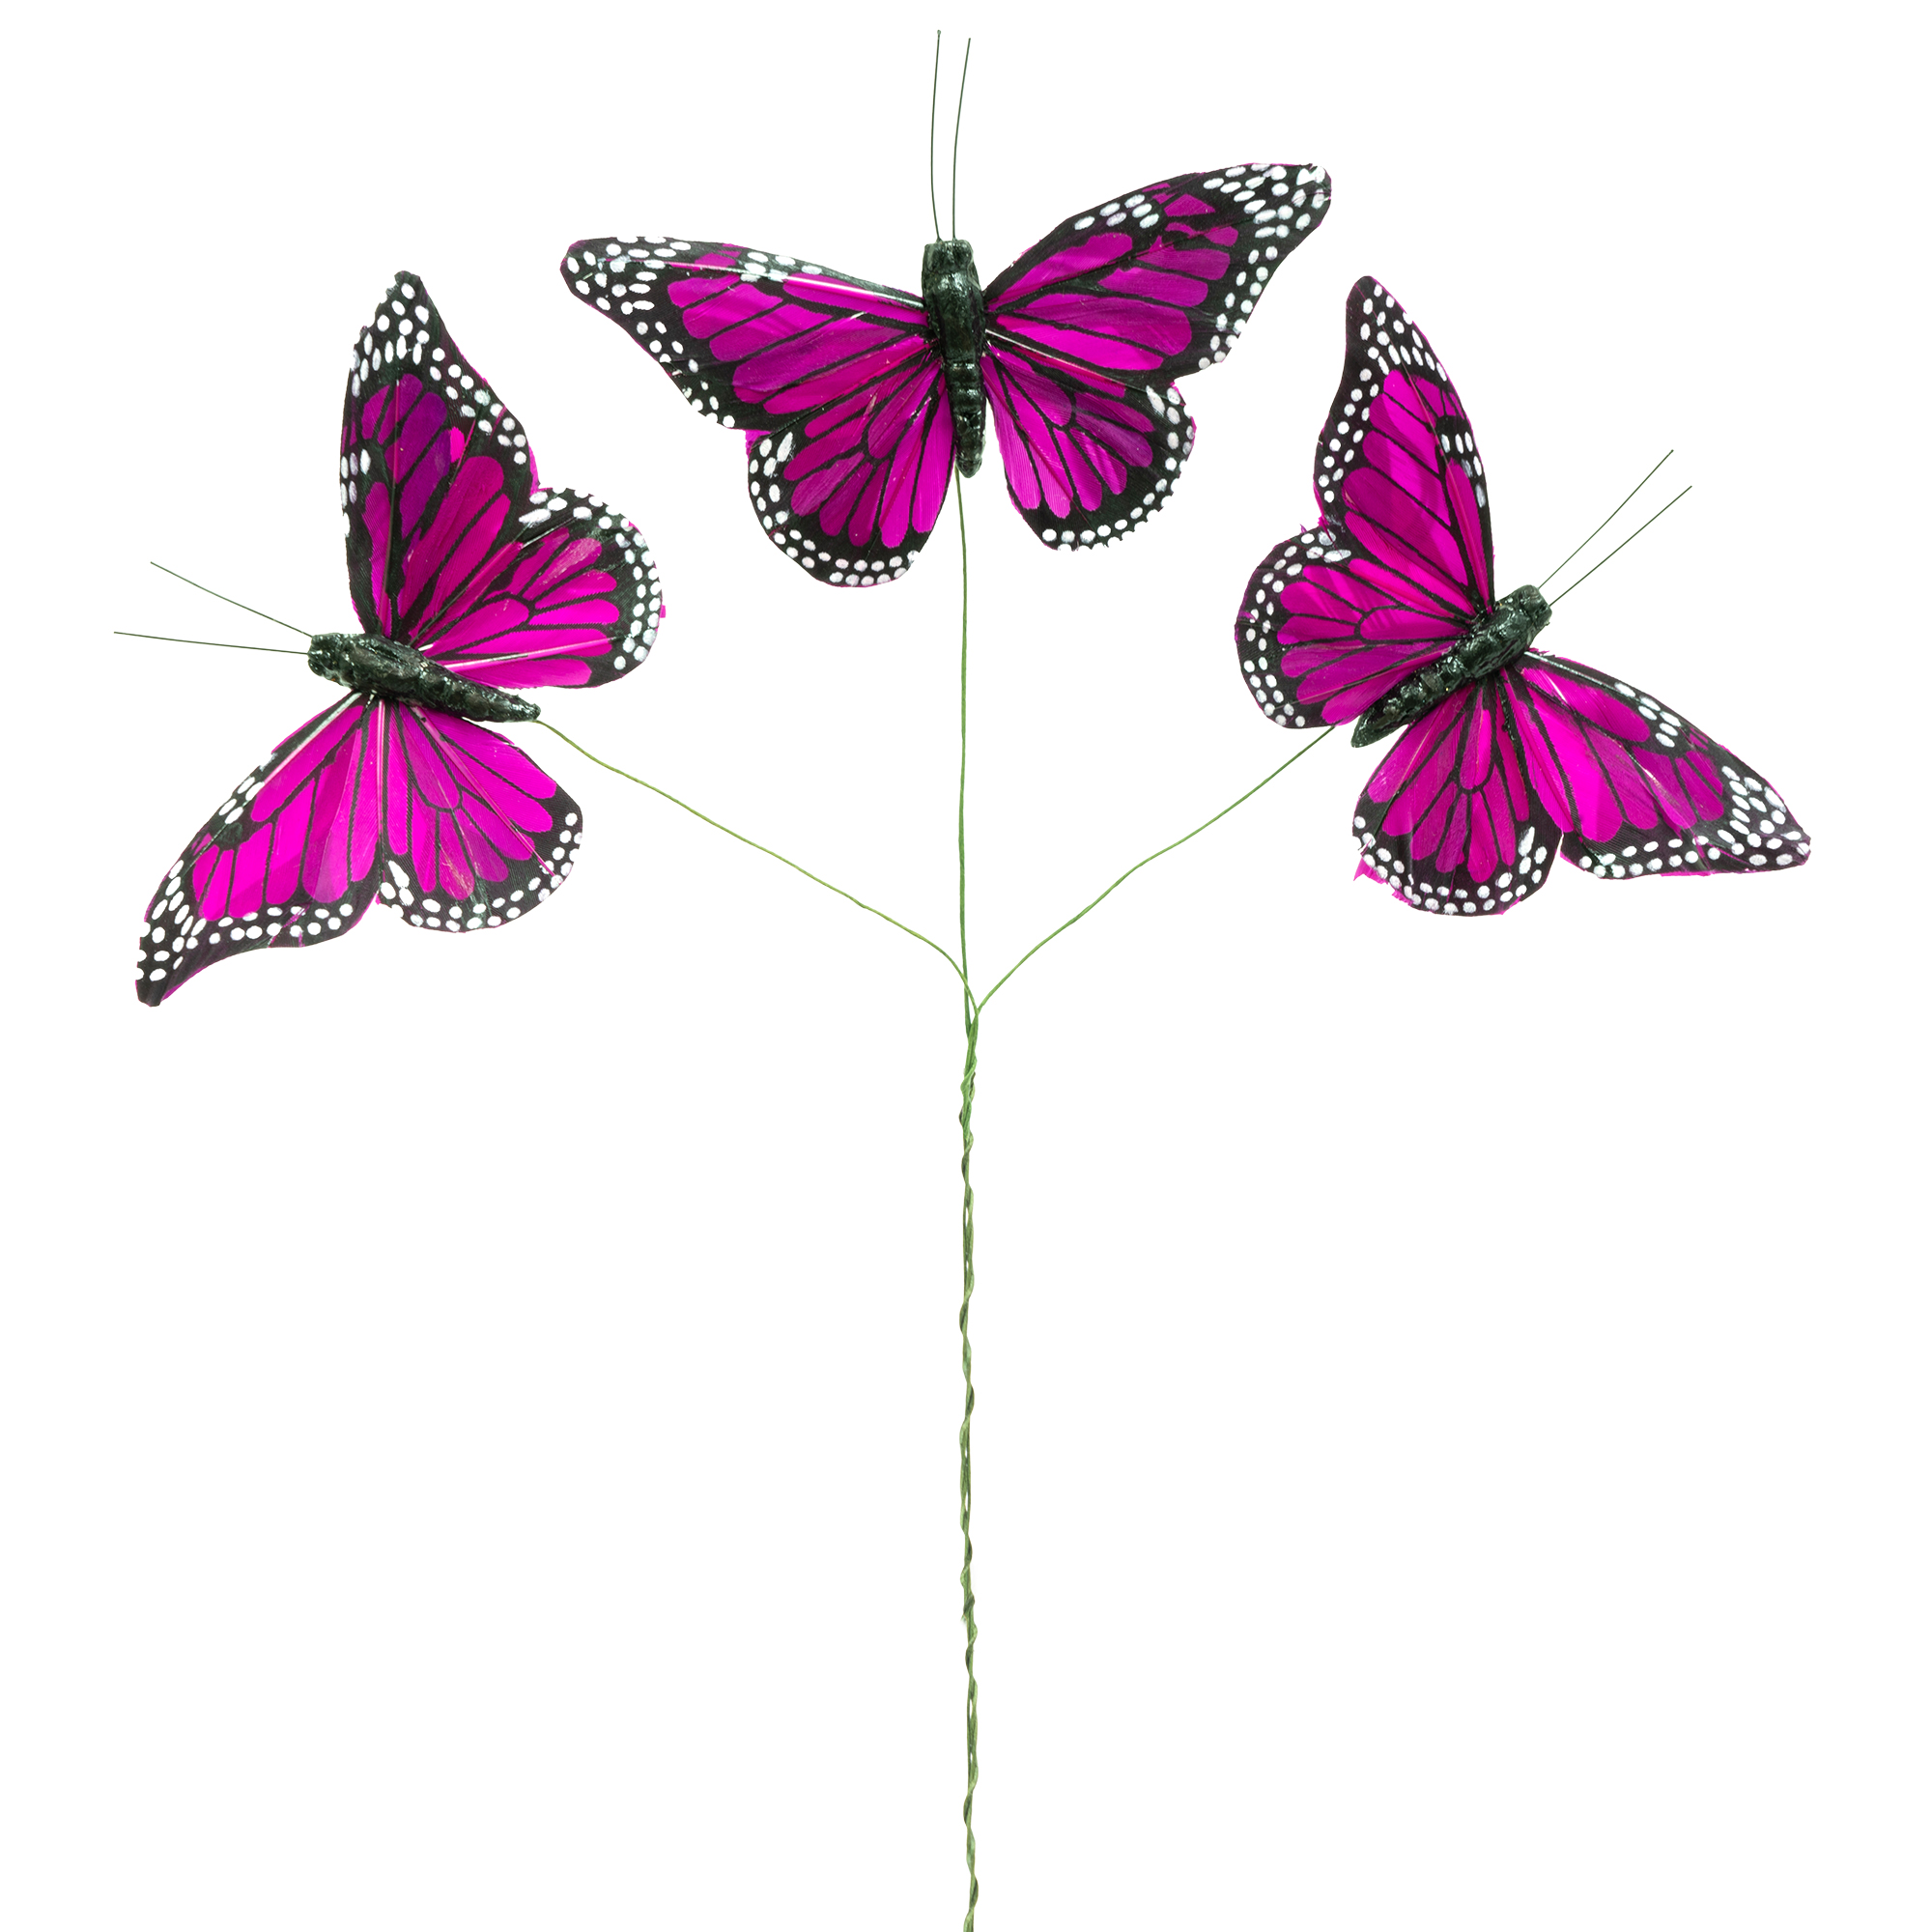 5" Artificial Monarch Butterfly 3pc/set With Wire - Fuchsia